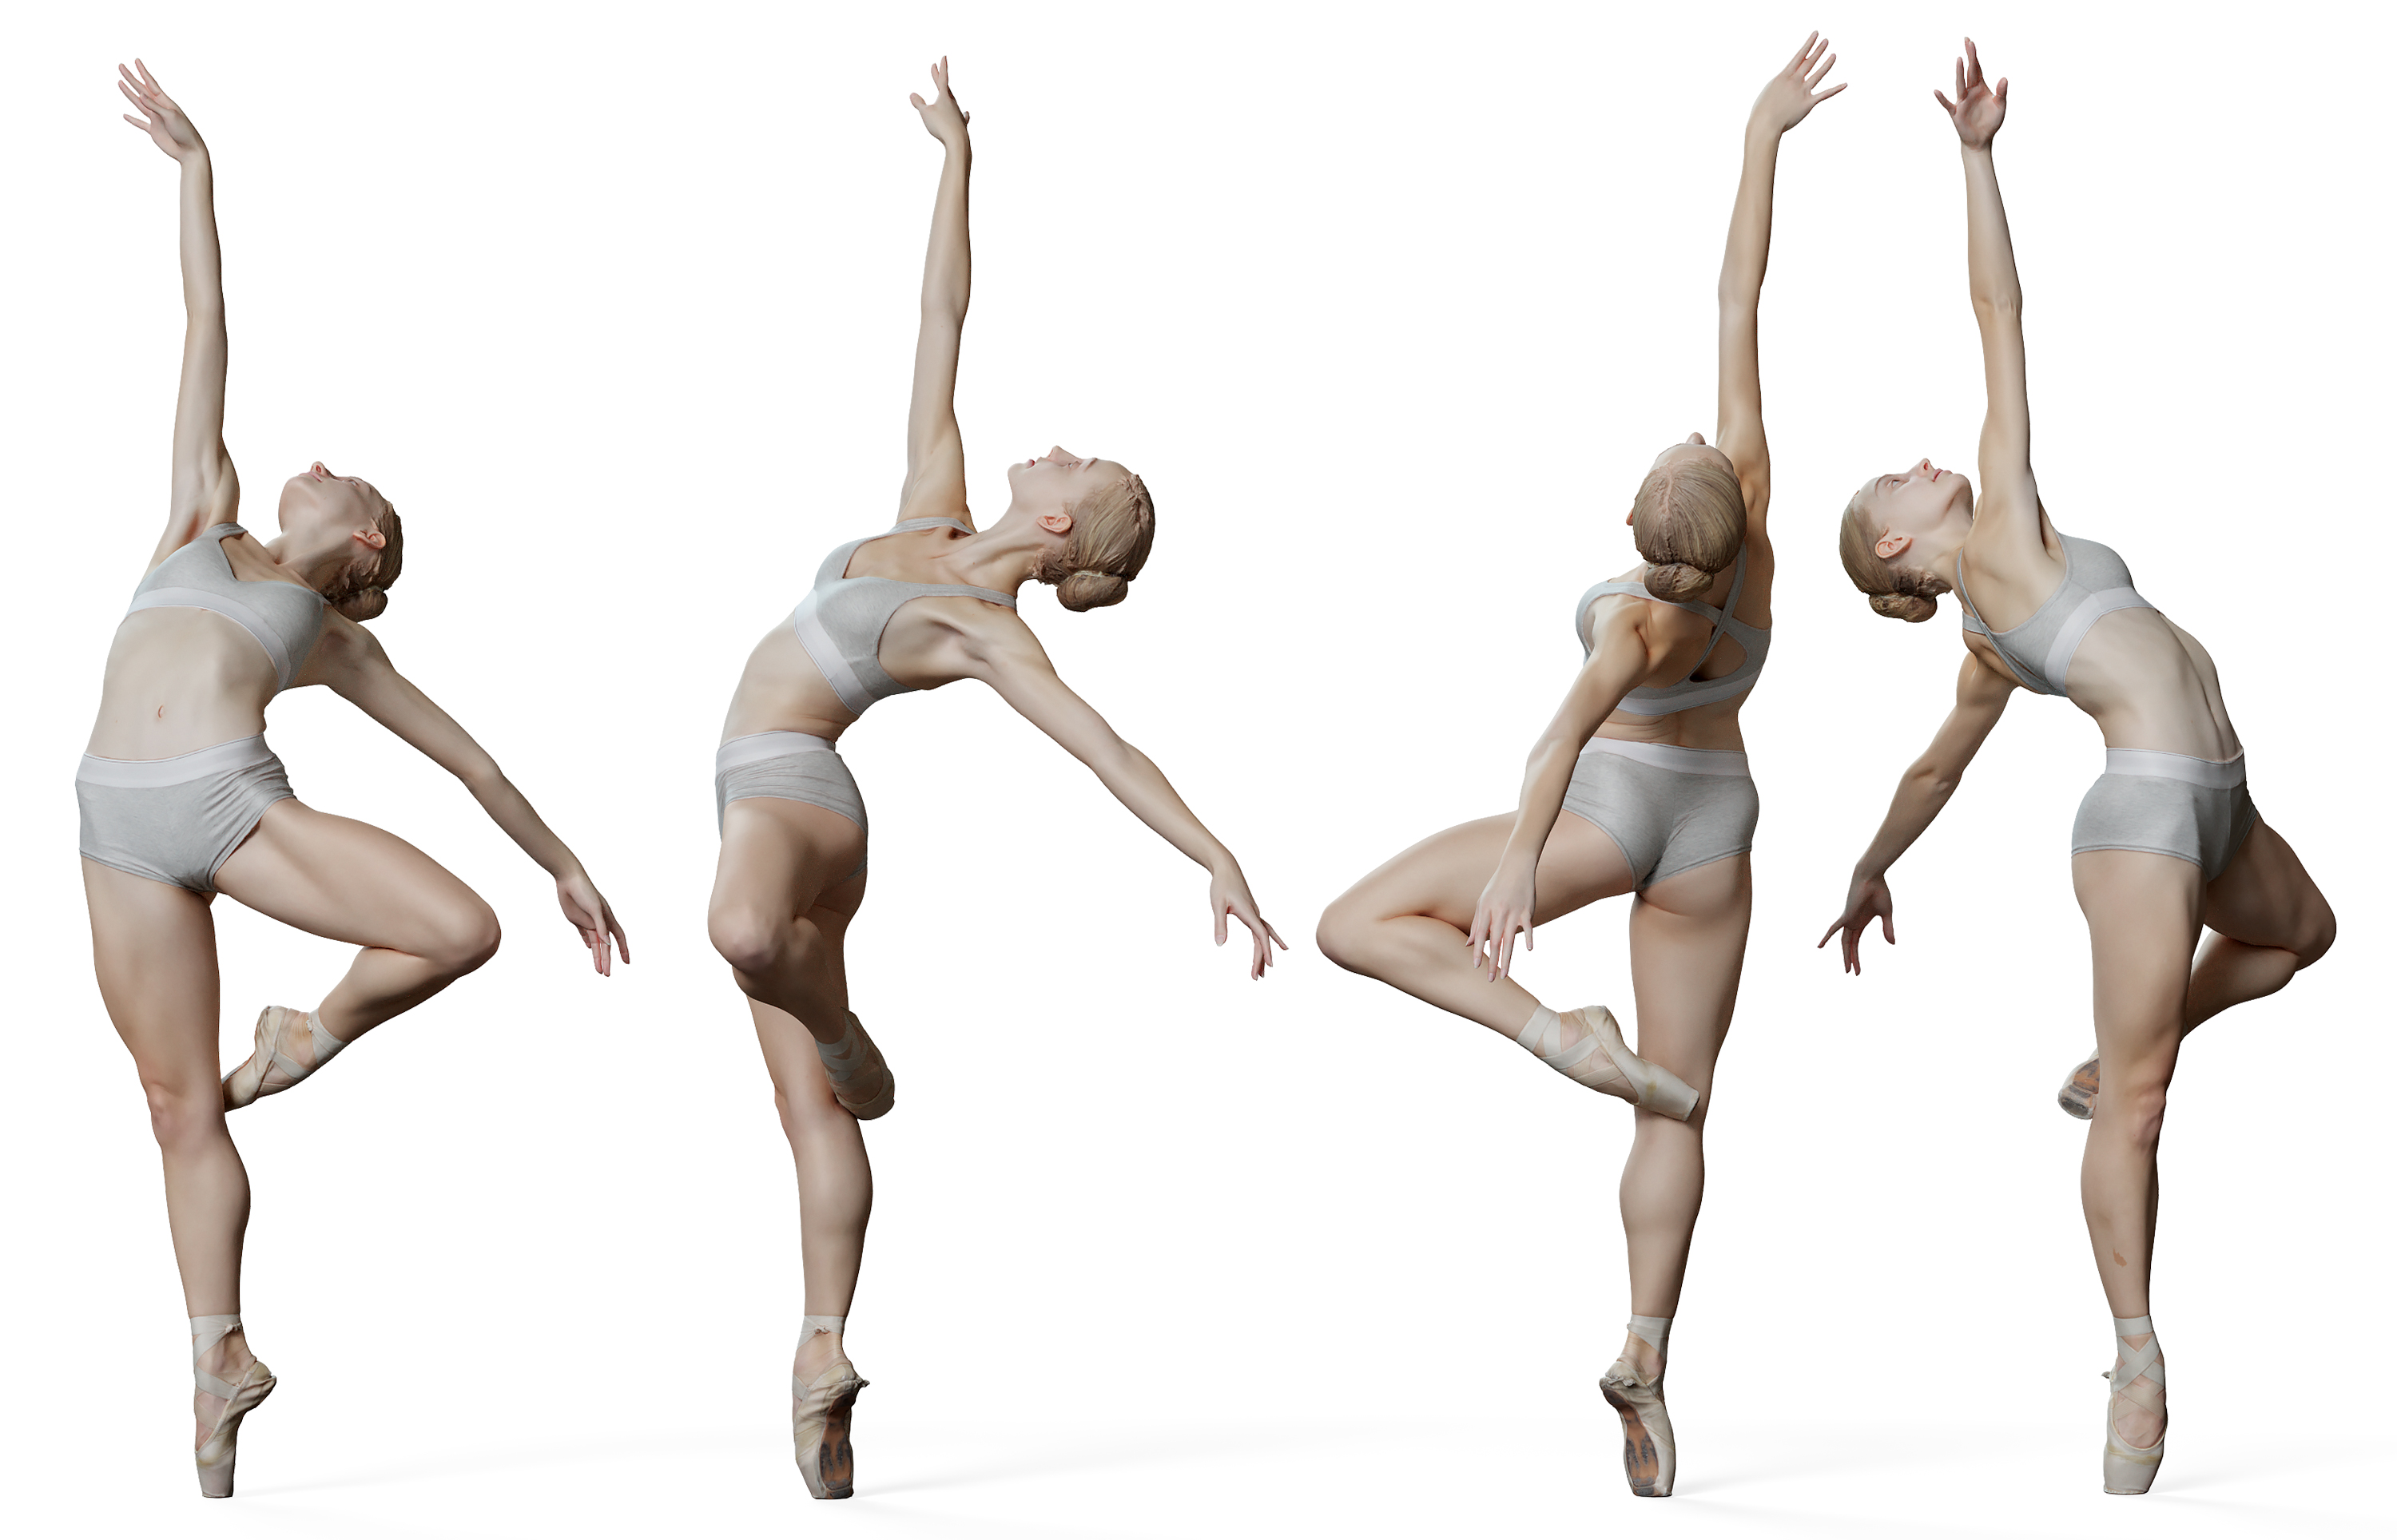 Premium Photo | Emotional female ballet dancer in body suit posing in dance  in various poses against white background.